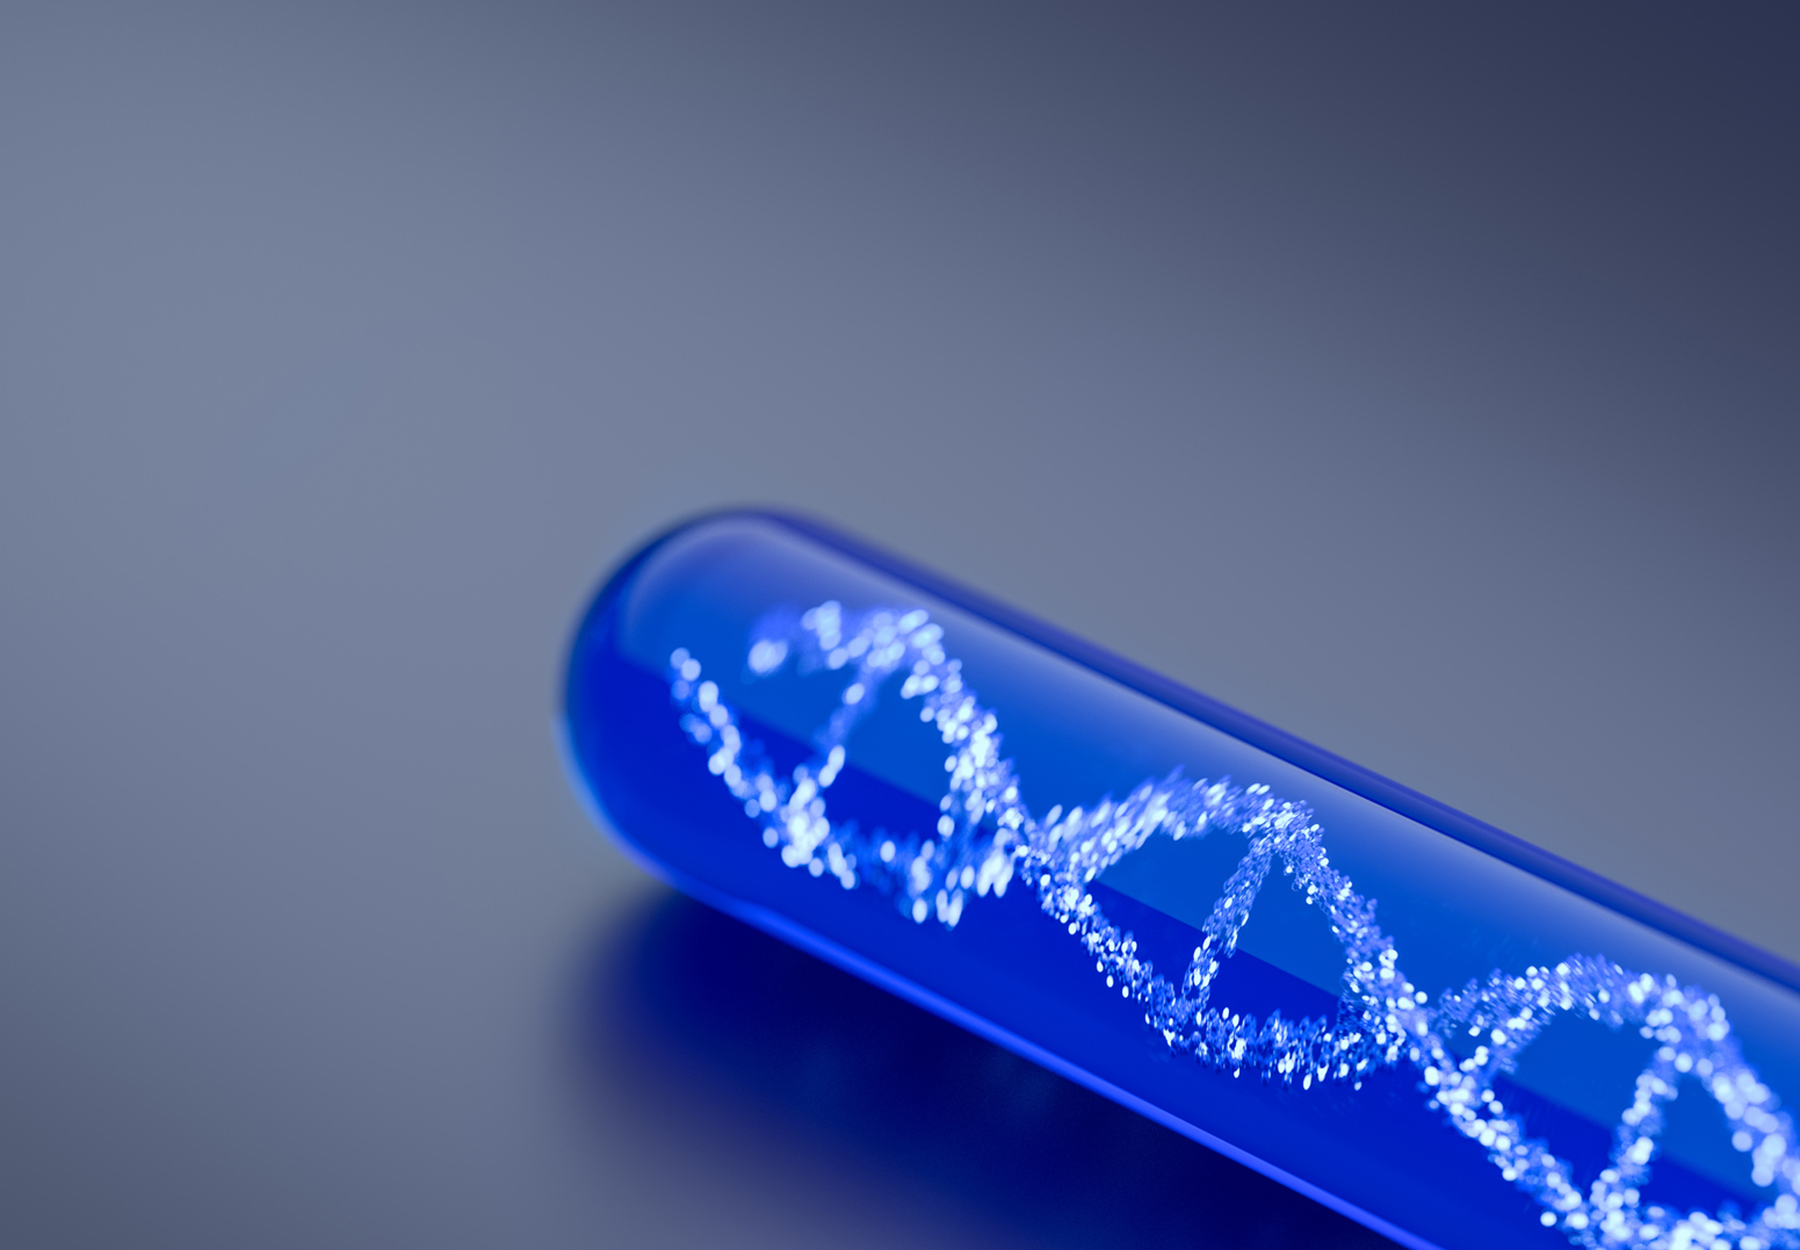 Photo illustration of blue test tube with DNA strand inside. Genetic testing concept. Stock image.